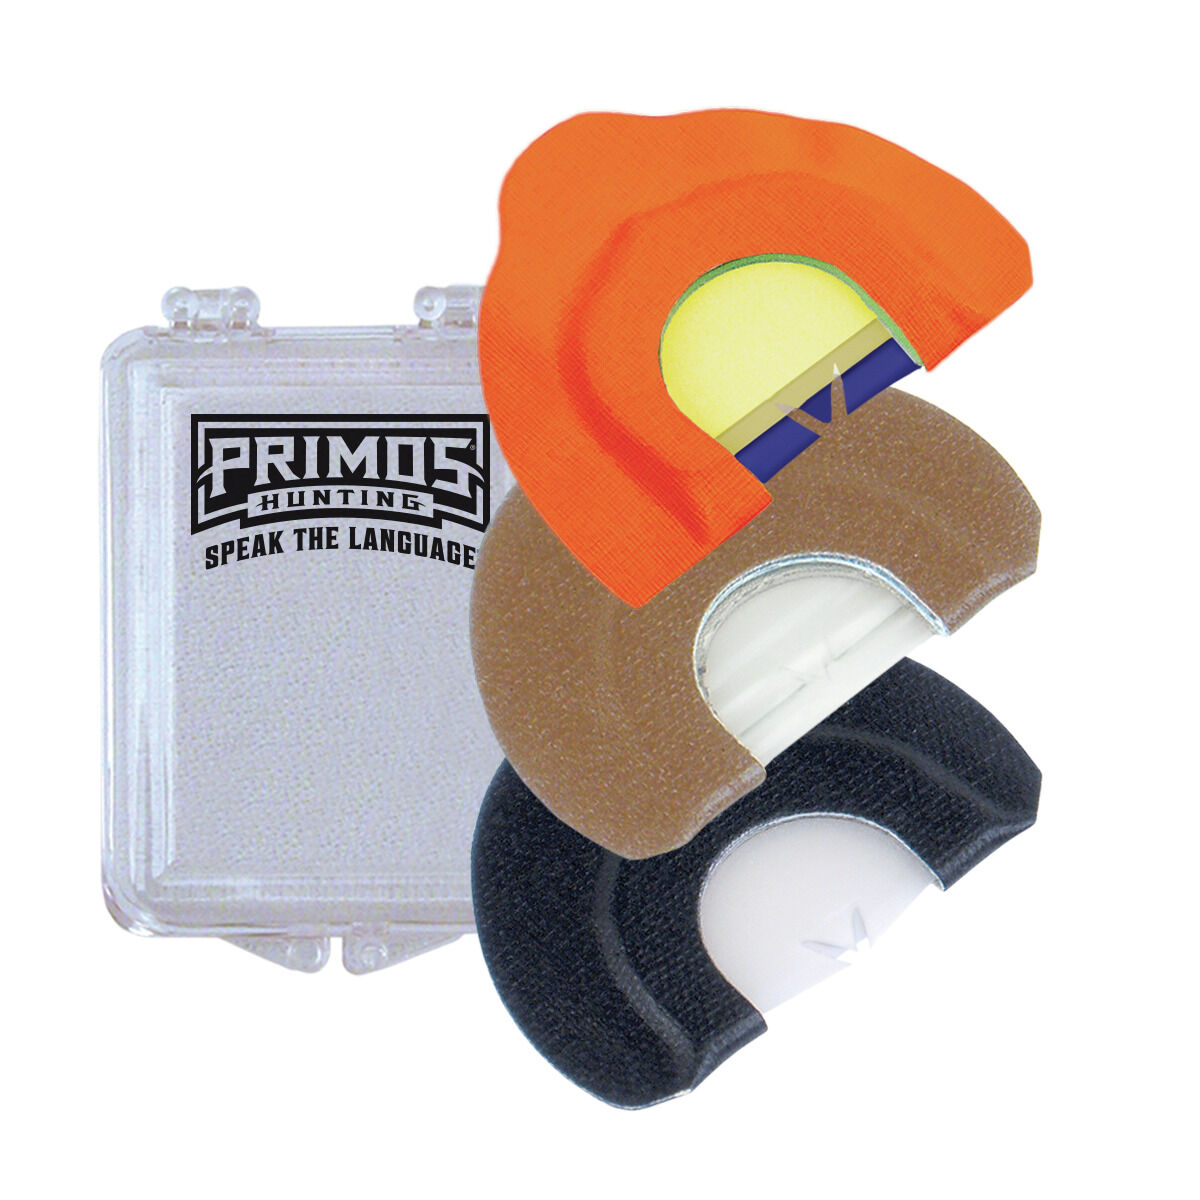 Primos A-Frame Double with Double Cut Turkey Mouth Diaphragm Call 1184 